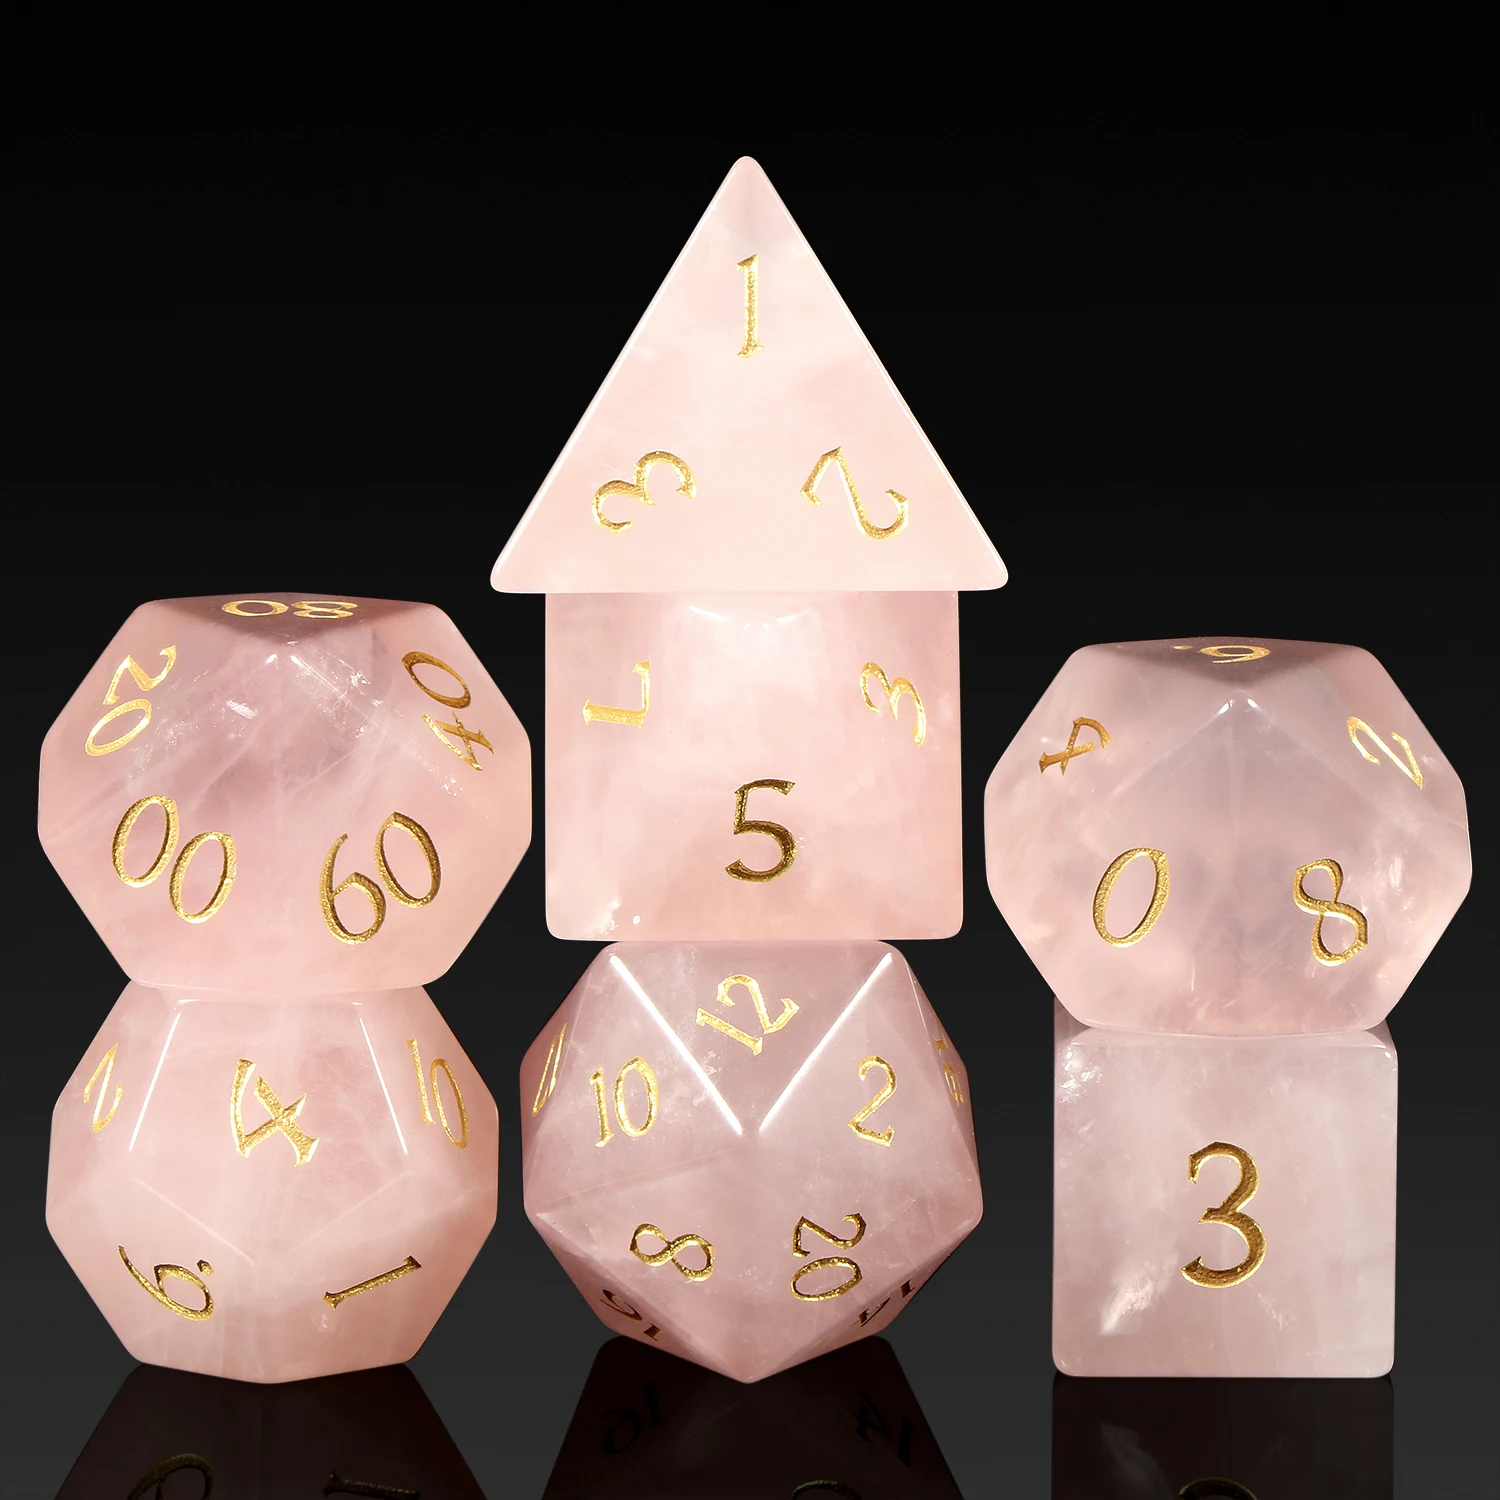 

Wholesale Natural gemstone Dice Custom DND Dice Stone Polyhedral Dice Set for Dungeons and Dragons Board Game Rose quartz